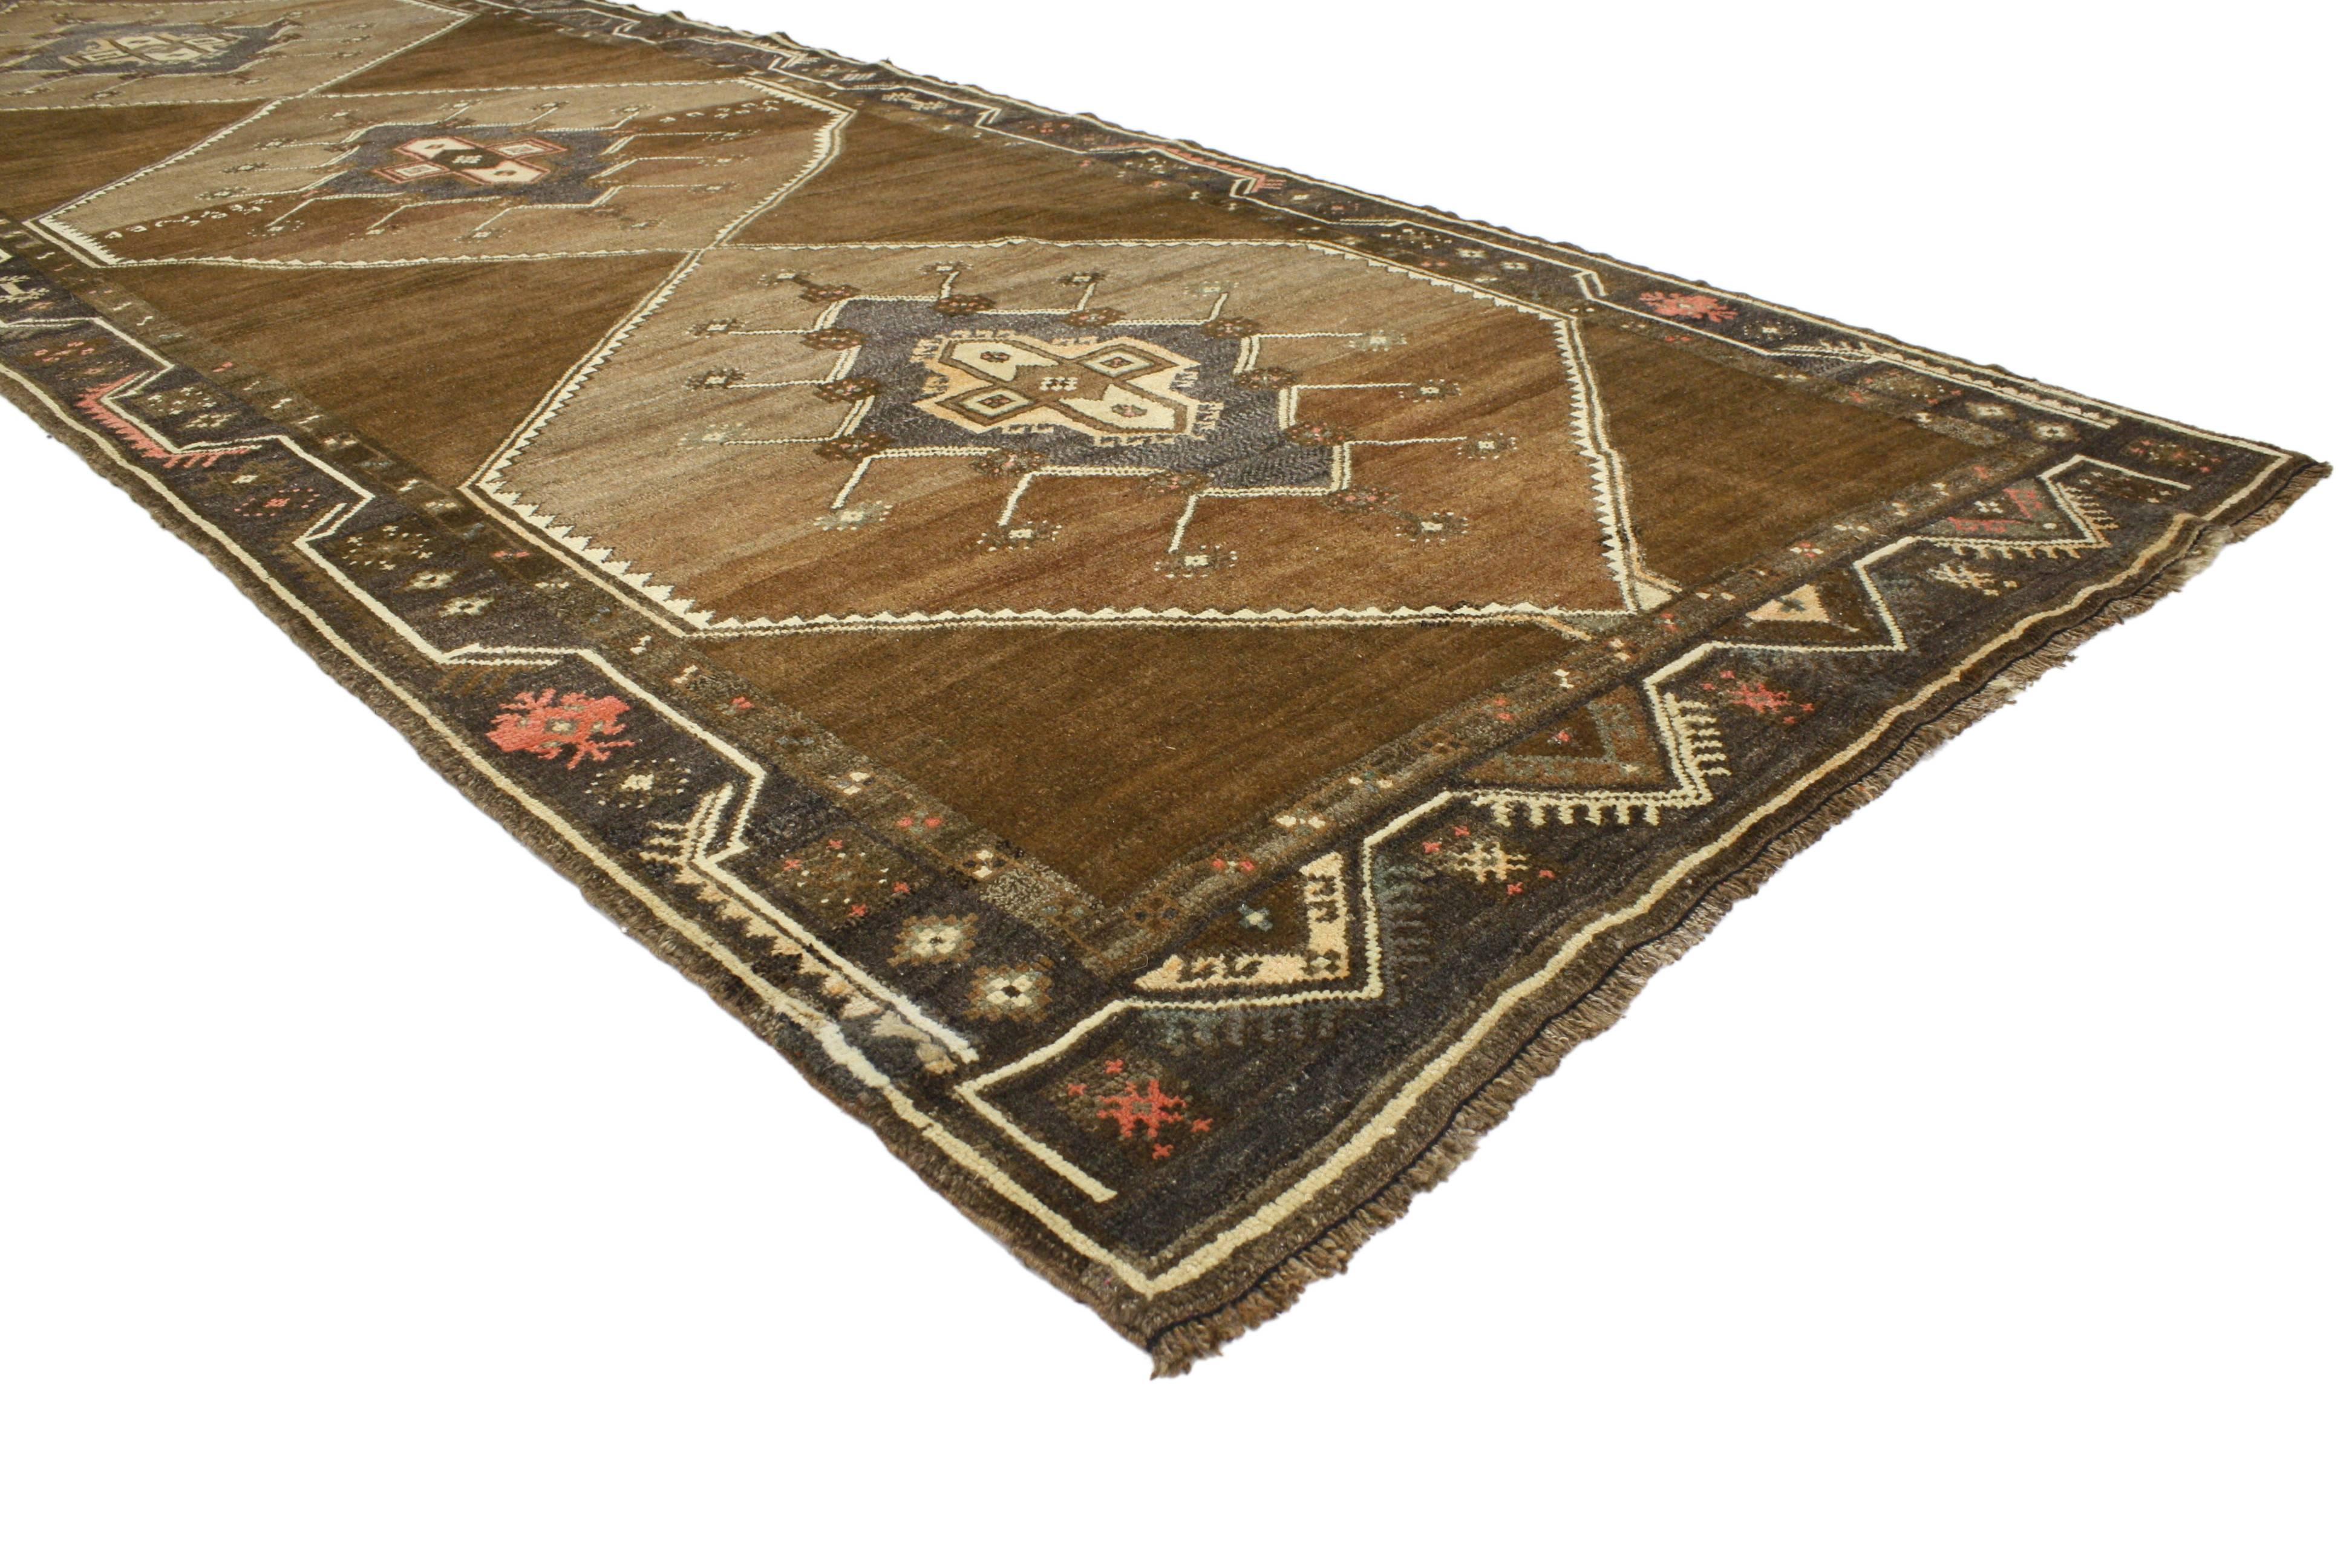 76968 Vintage Turkish Oushak Runner with Mid-Century Modern Style, Wide Hallway Runner. This hand-knotted wool vintage Turkish Oushak runner with Mid-Century Modern style features three stacked hexagonal medallions with an inner saw-tooth outline.